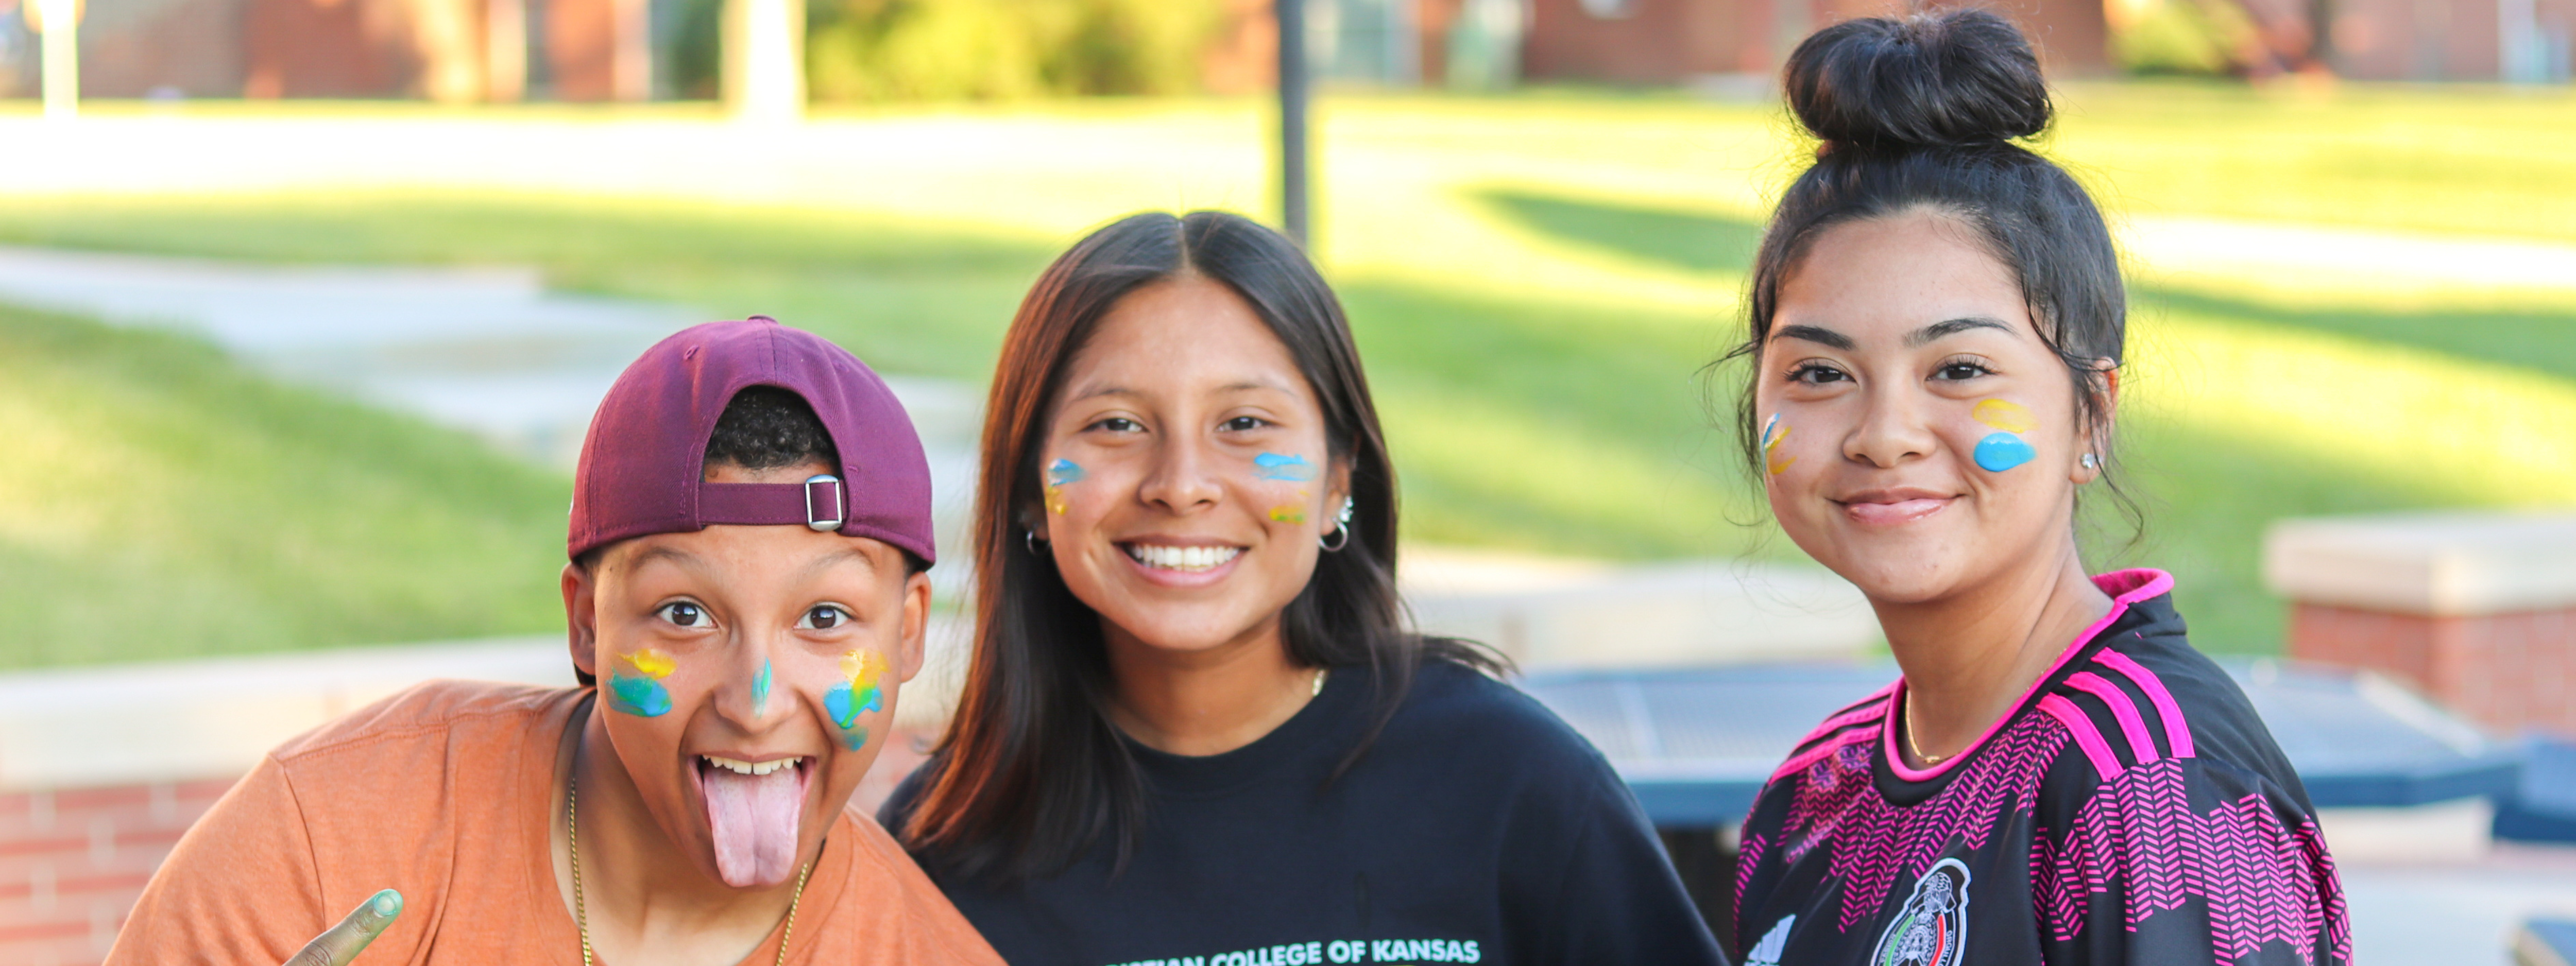 Human Services Photo Header: Central girls posing and smiling in the plaza with blue and yellow face paint